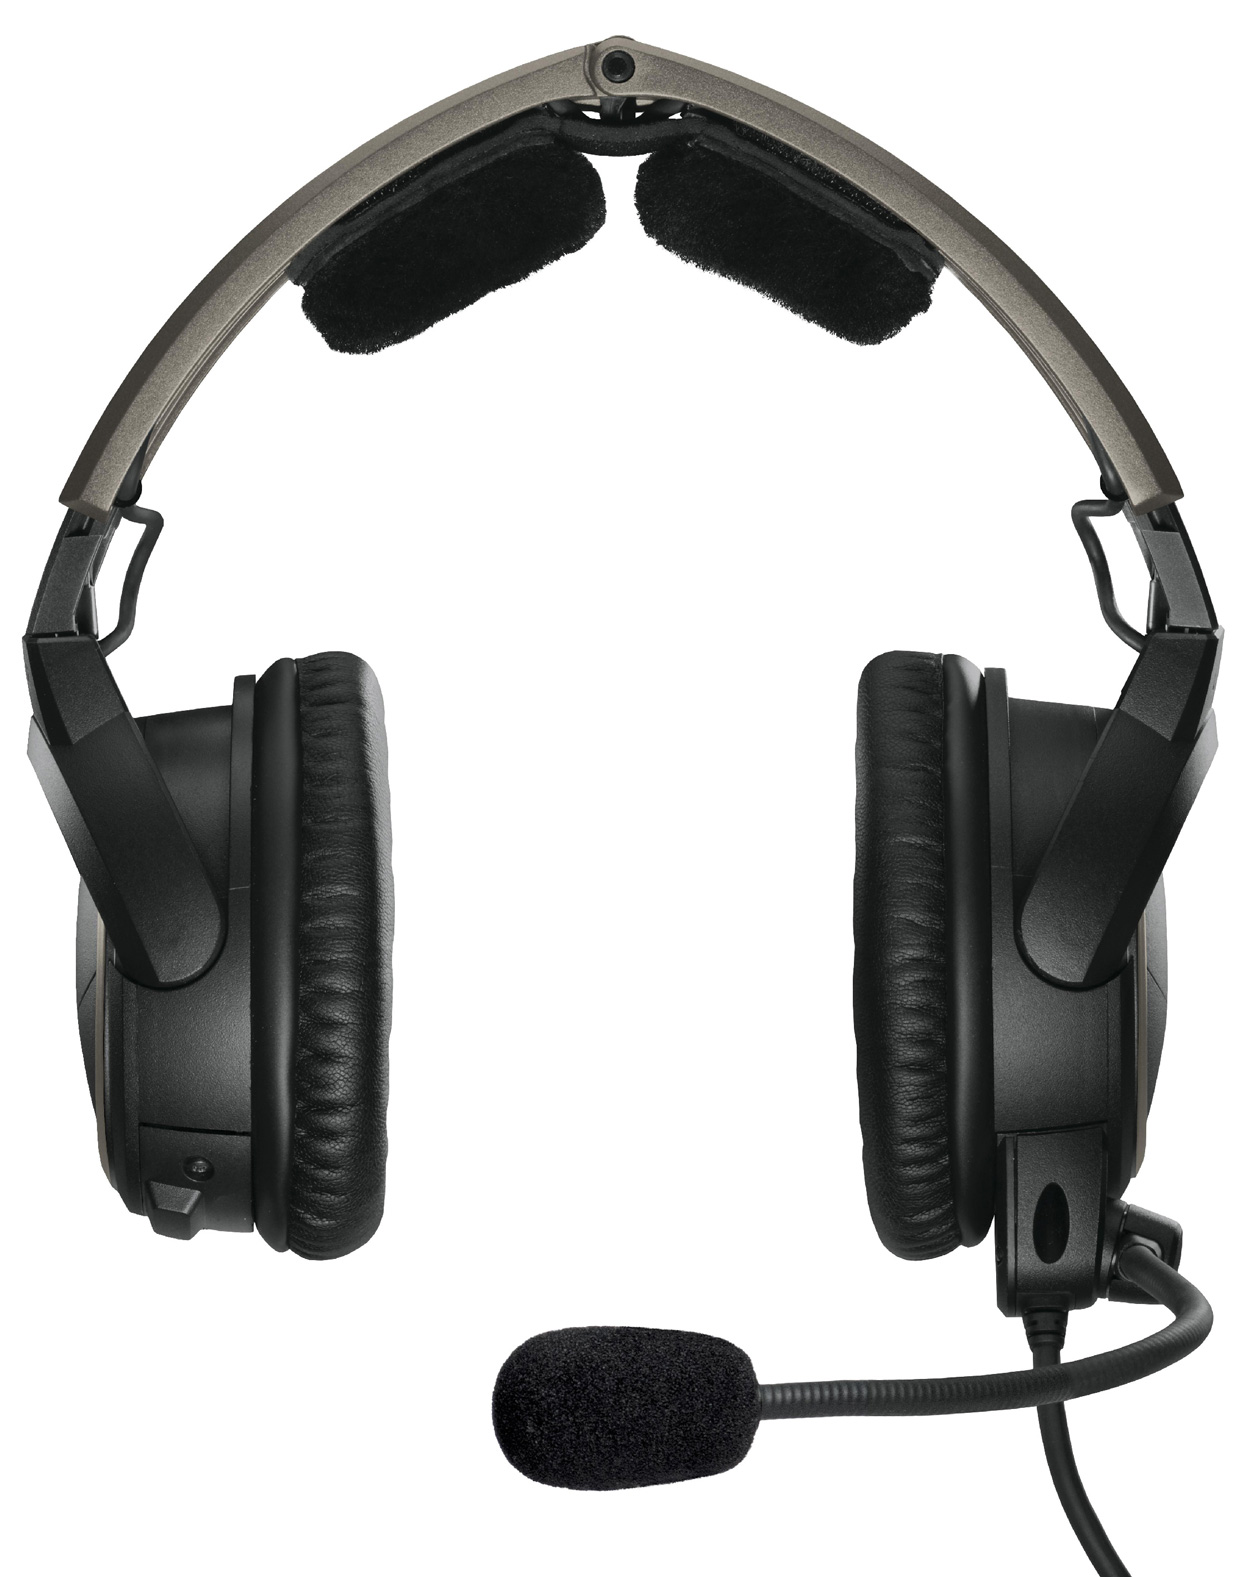 Bose A20 Headset with Lemo 6 pin Plug, Non-Bluetooth, Low Impedance (324843-2140)